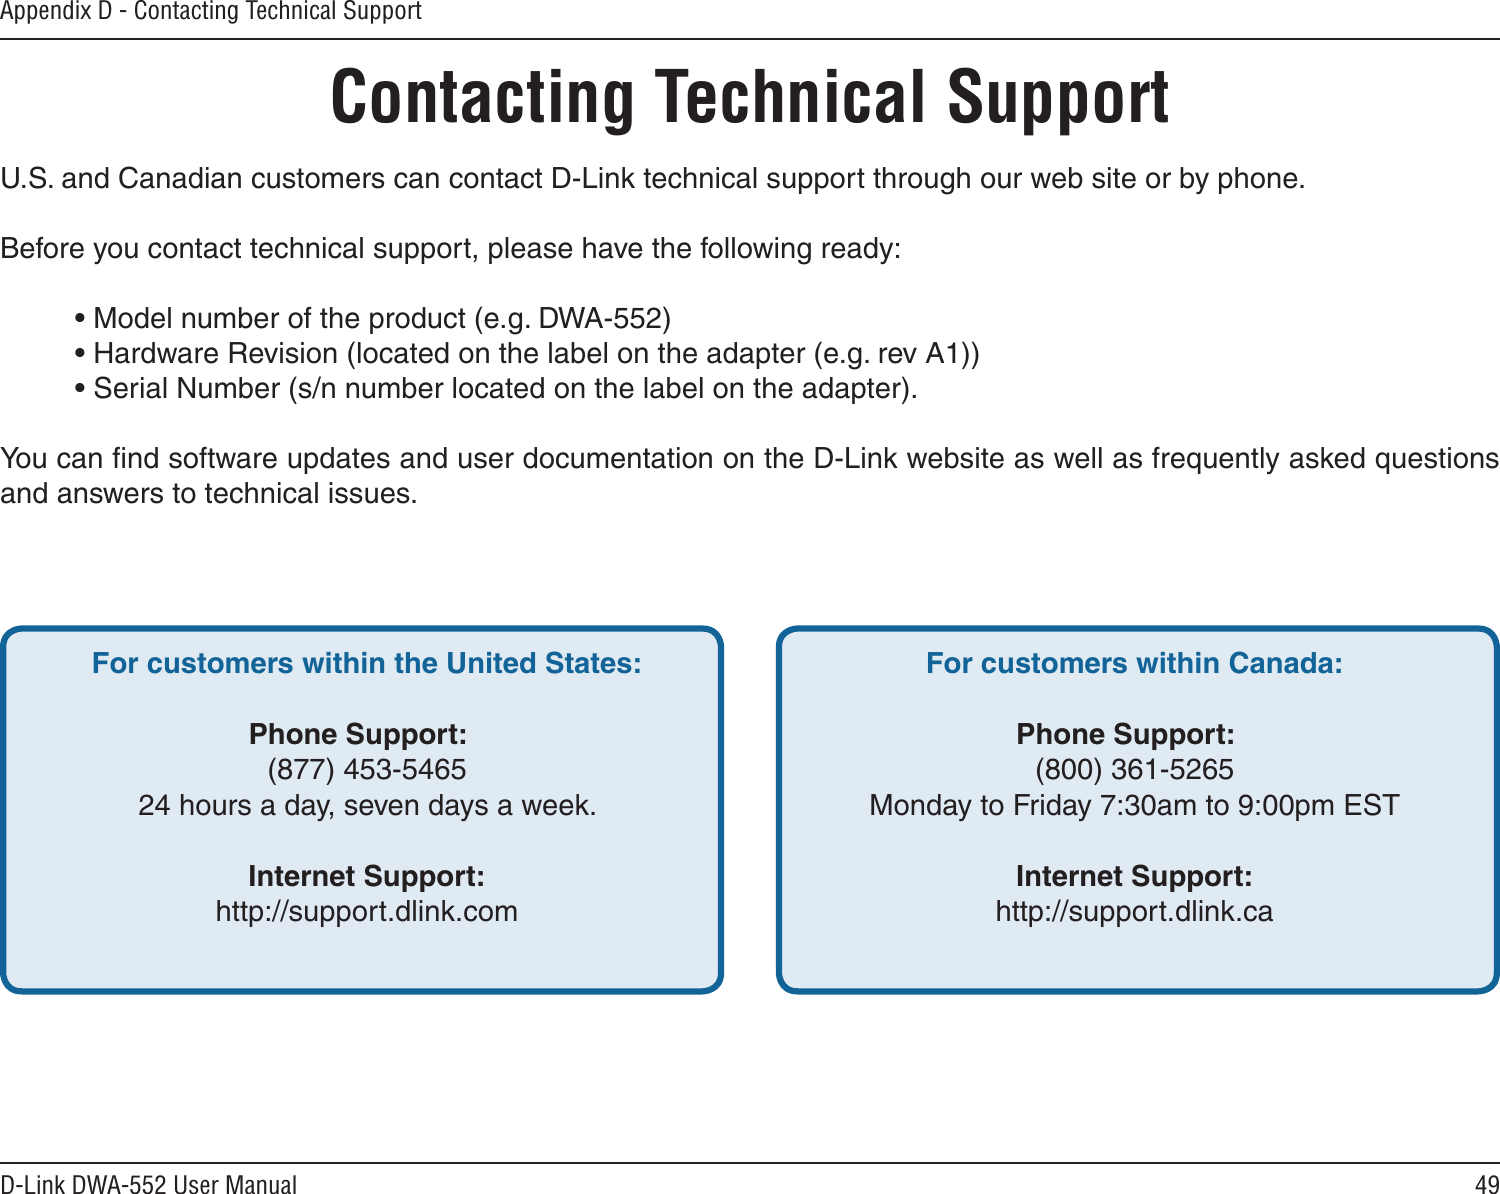 49D-Link DWA-552 User ManualAppendix D - Contacting Technical SupportContacting Technical SupportU.S. and Canadian customers can contact D-Link technical support through our web site or by phone.Before you contact technical support, please have the following ready:  • Model number of the product (e.g. DWA-552)  • Hardware Revision (located on the label on the adapter (e.g. rev A1))  • Serial Number (s/n number located on the label on the adapter). You can ﬁnd software updates and user documentation on the D-Link website as well as frequently asked questions and answers to technical issues.For customers within the United States: Phone Support:  (877) 453-5465  24 hours a day, seven days a week. Internet Support:  http://support.dlink.com For customers within Canada: Phone Support:  (800) 361-5265  Monday to Friday 7:30am to 9:00pm EST  Internet Support:  http://support.dlink.ca